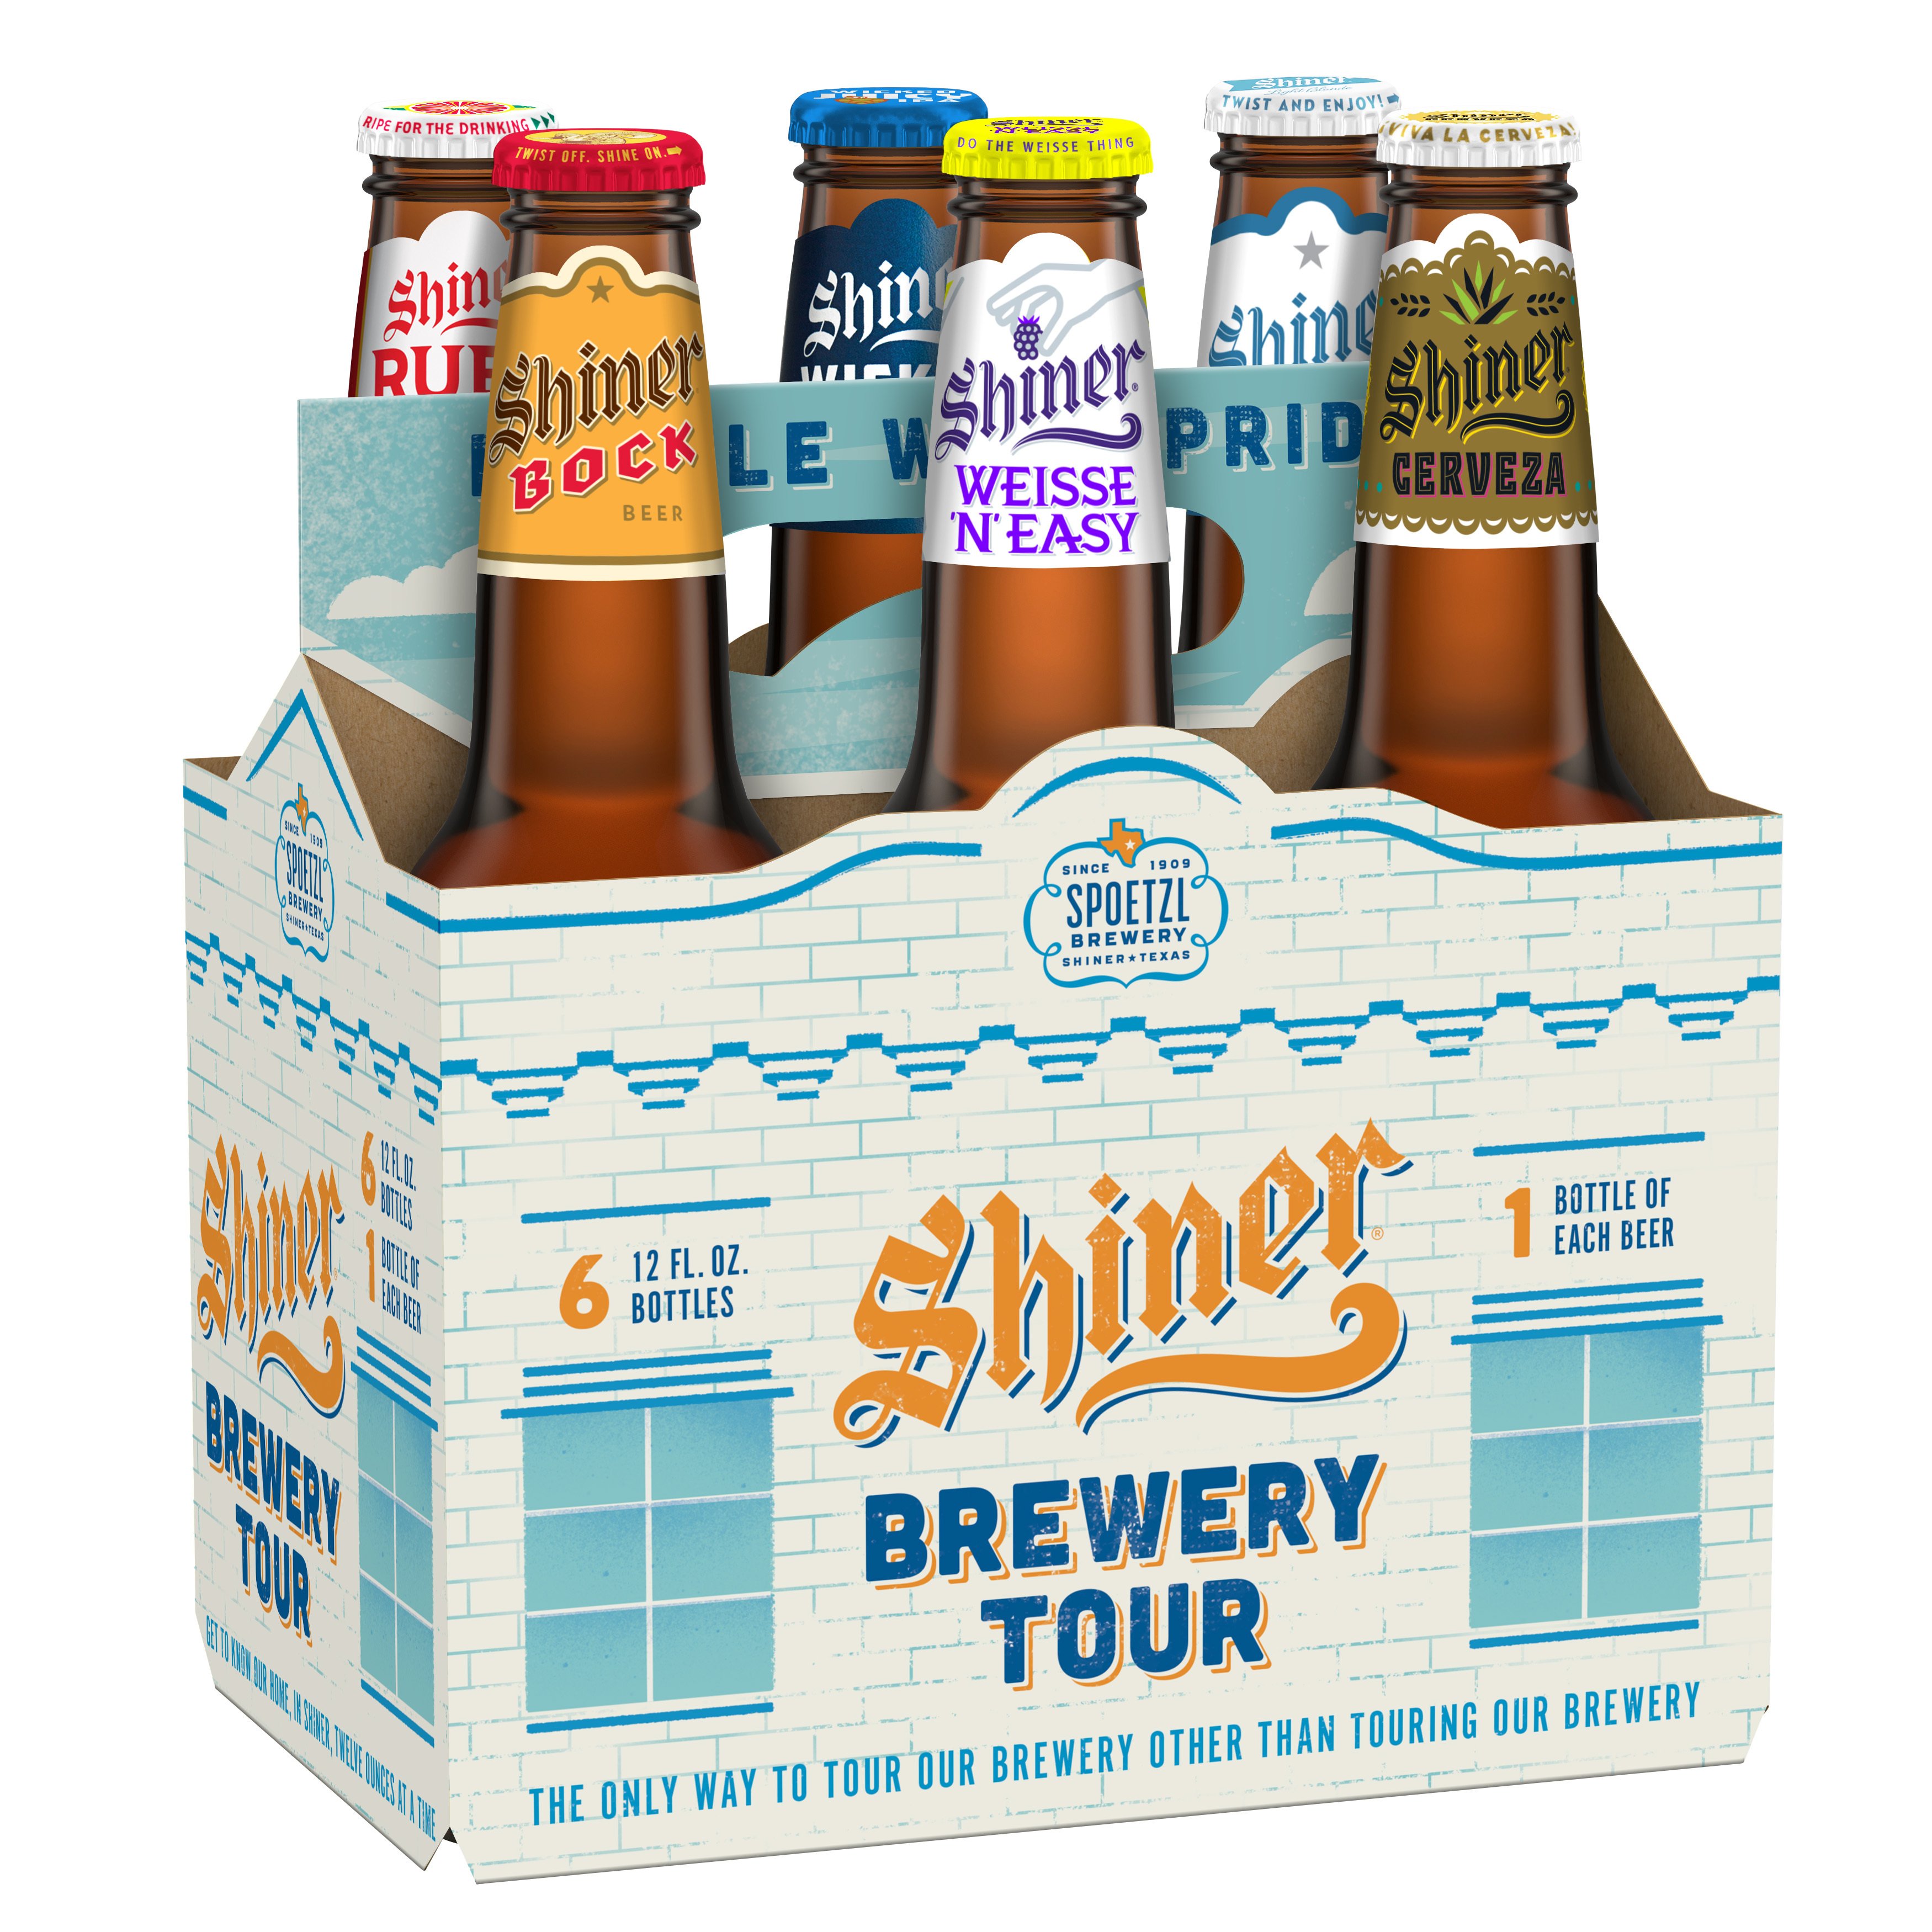 shiner brewery tour times